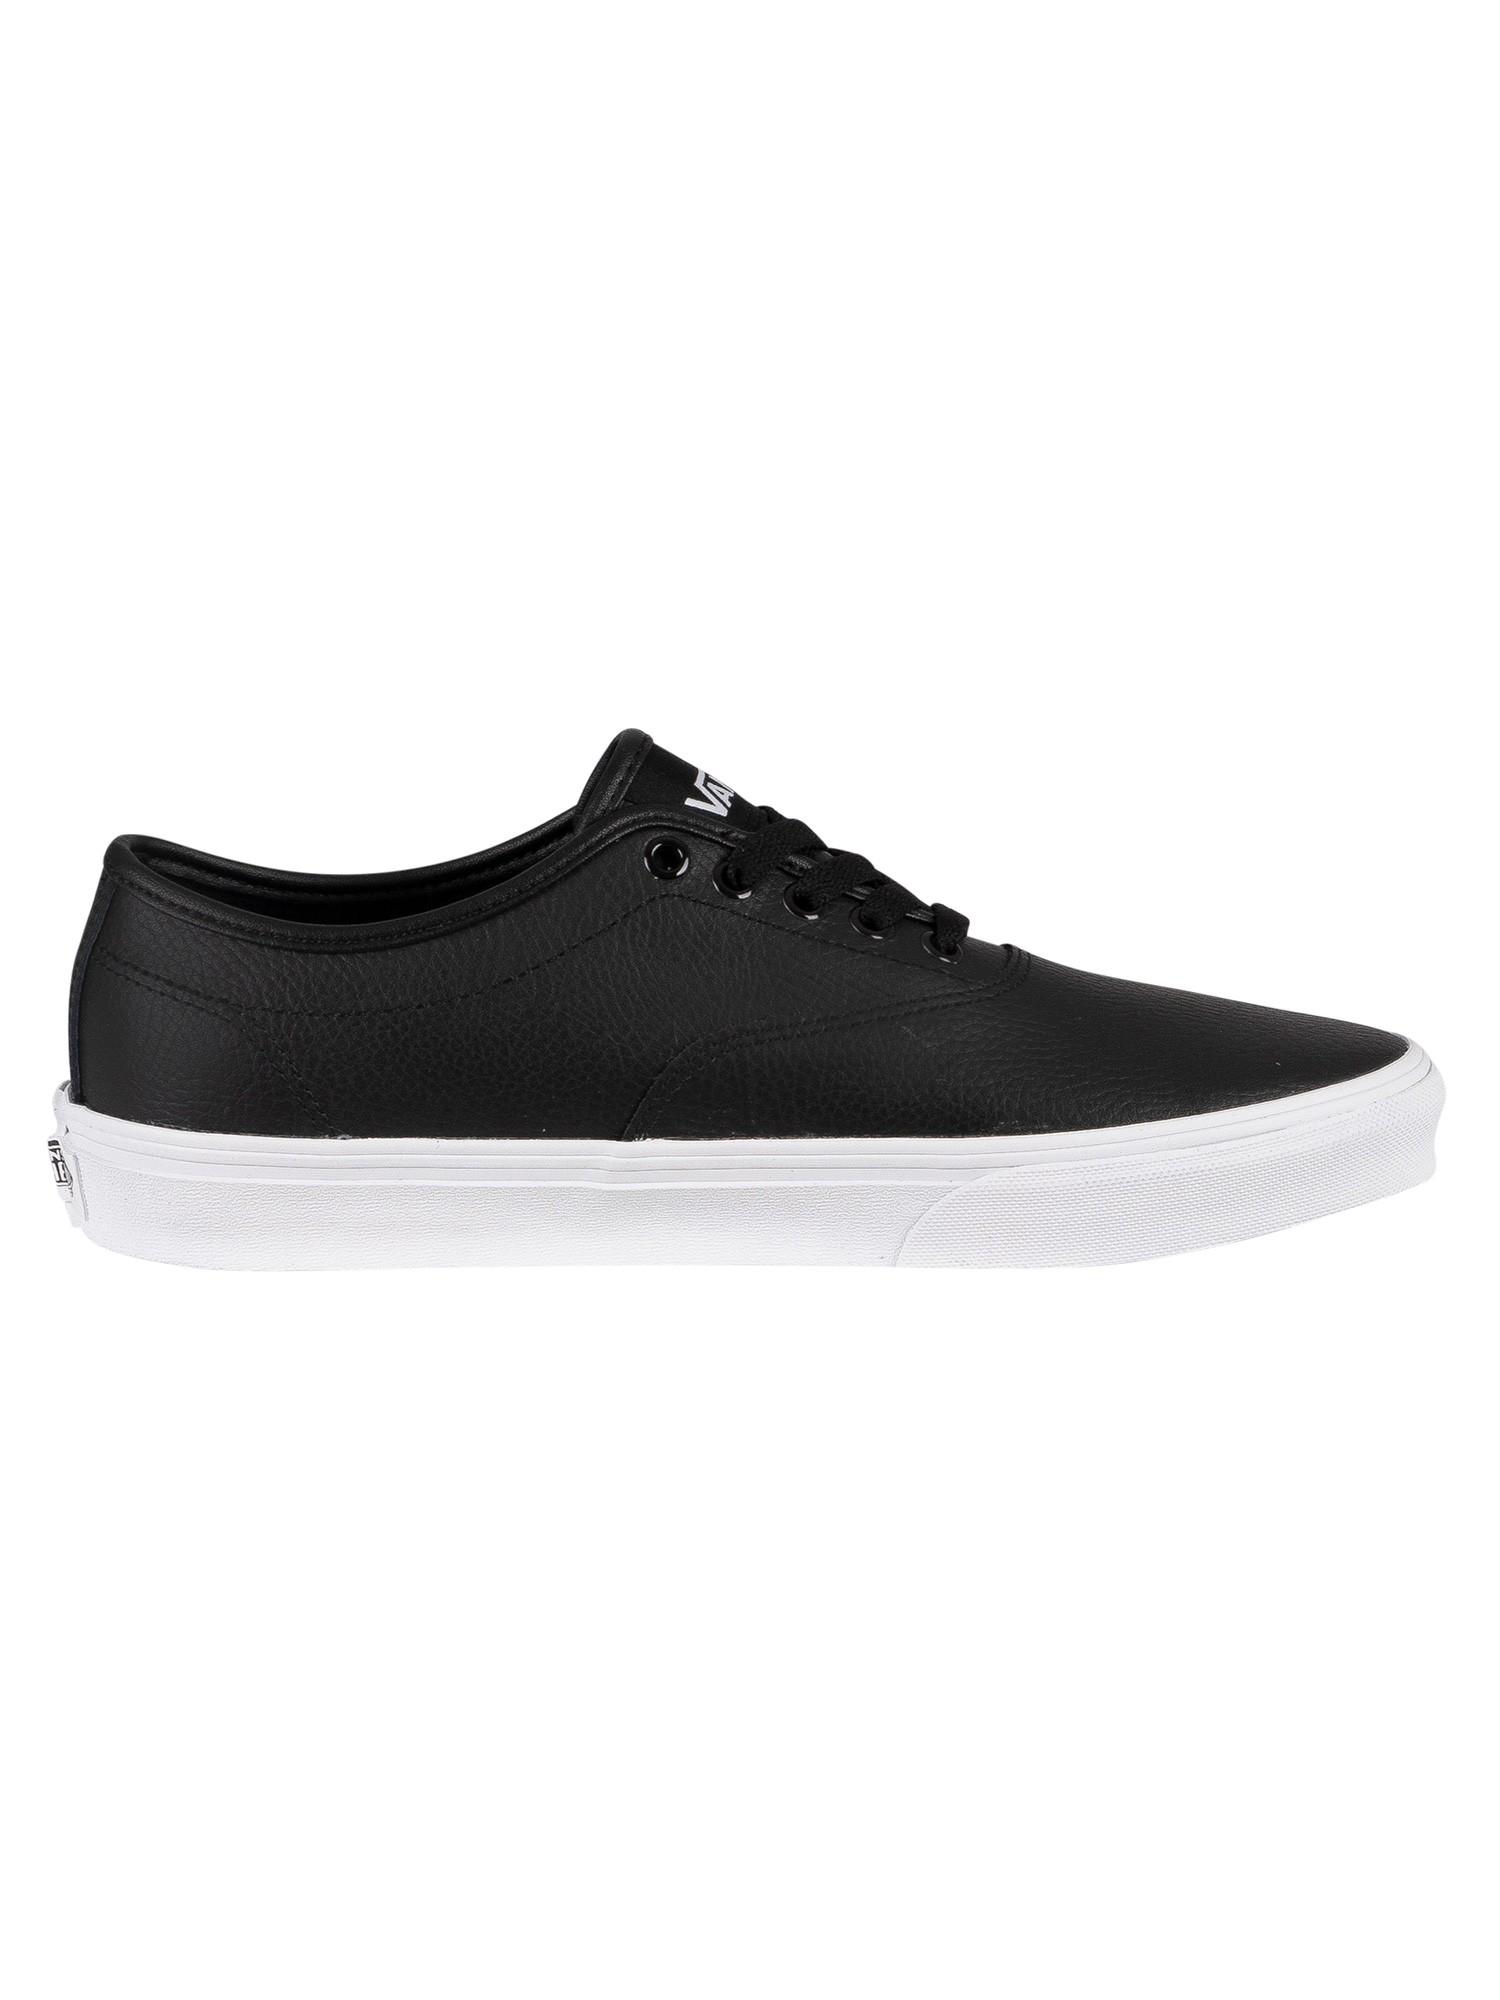 Vans Doheny Decon Tumble Leather Trainers in Black for Men | Lyst